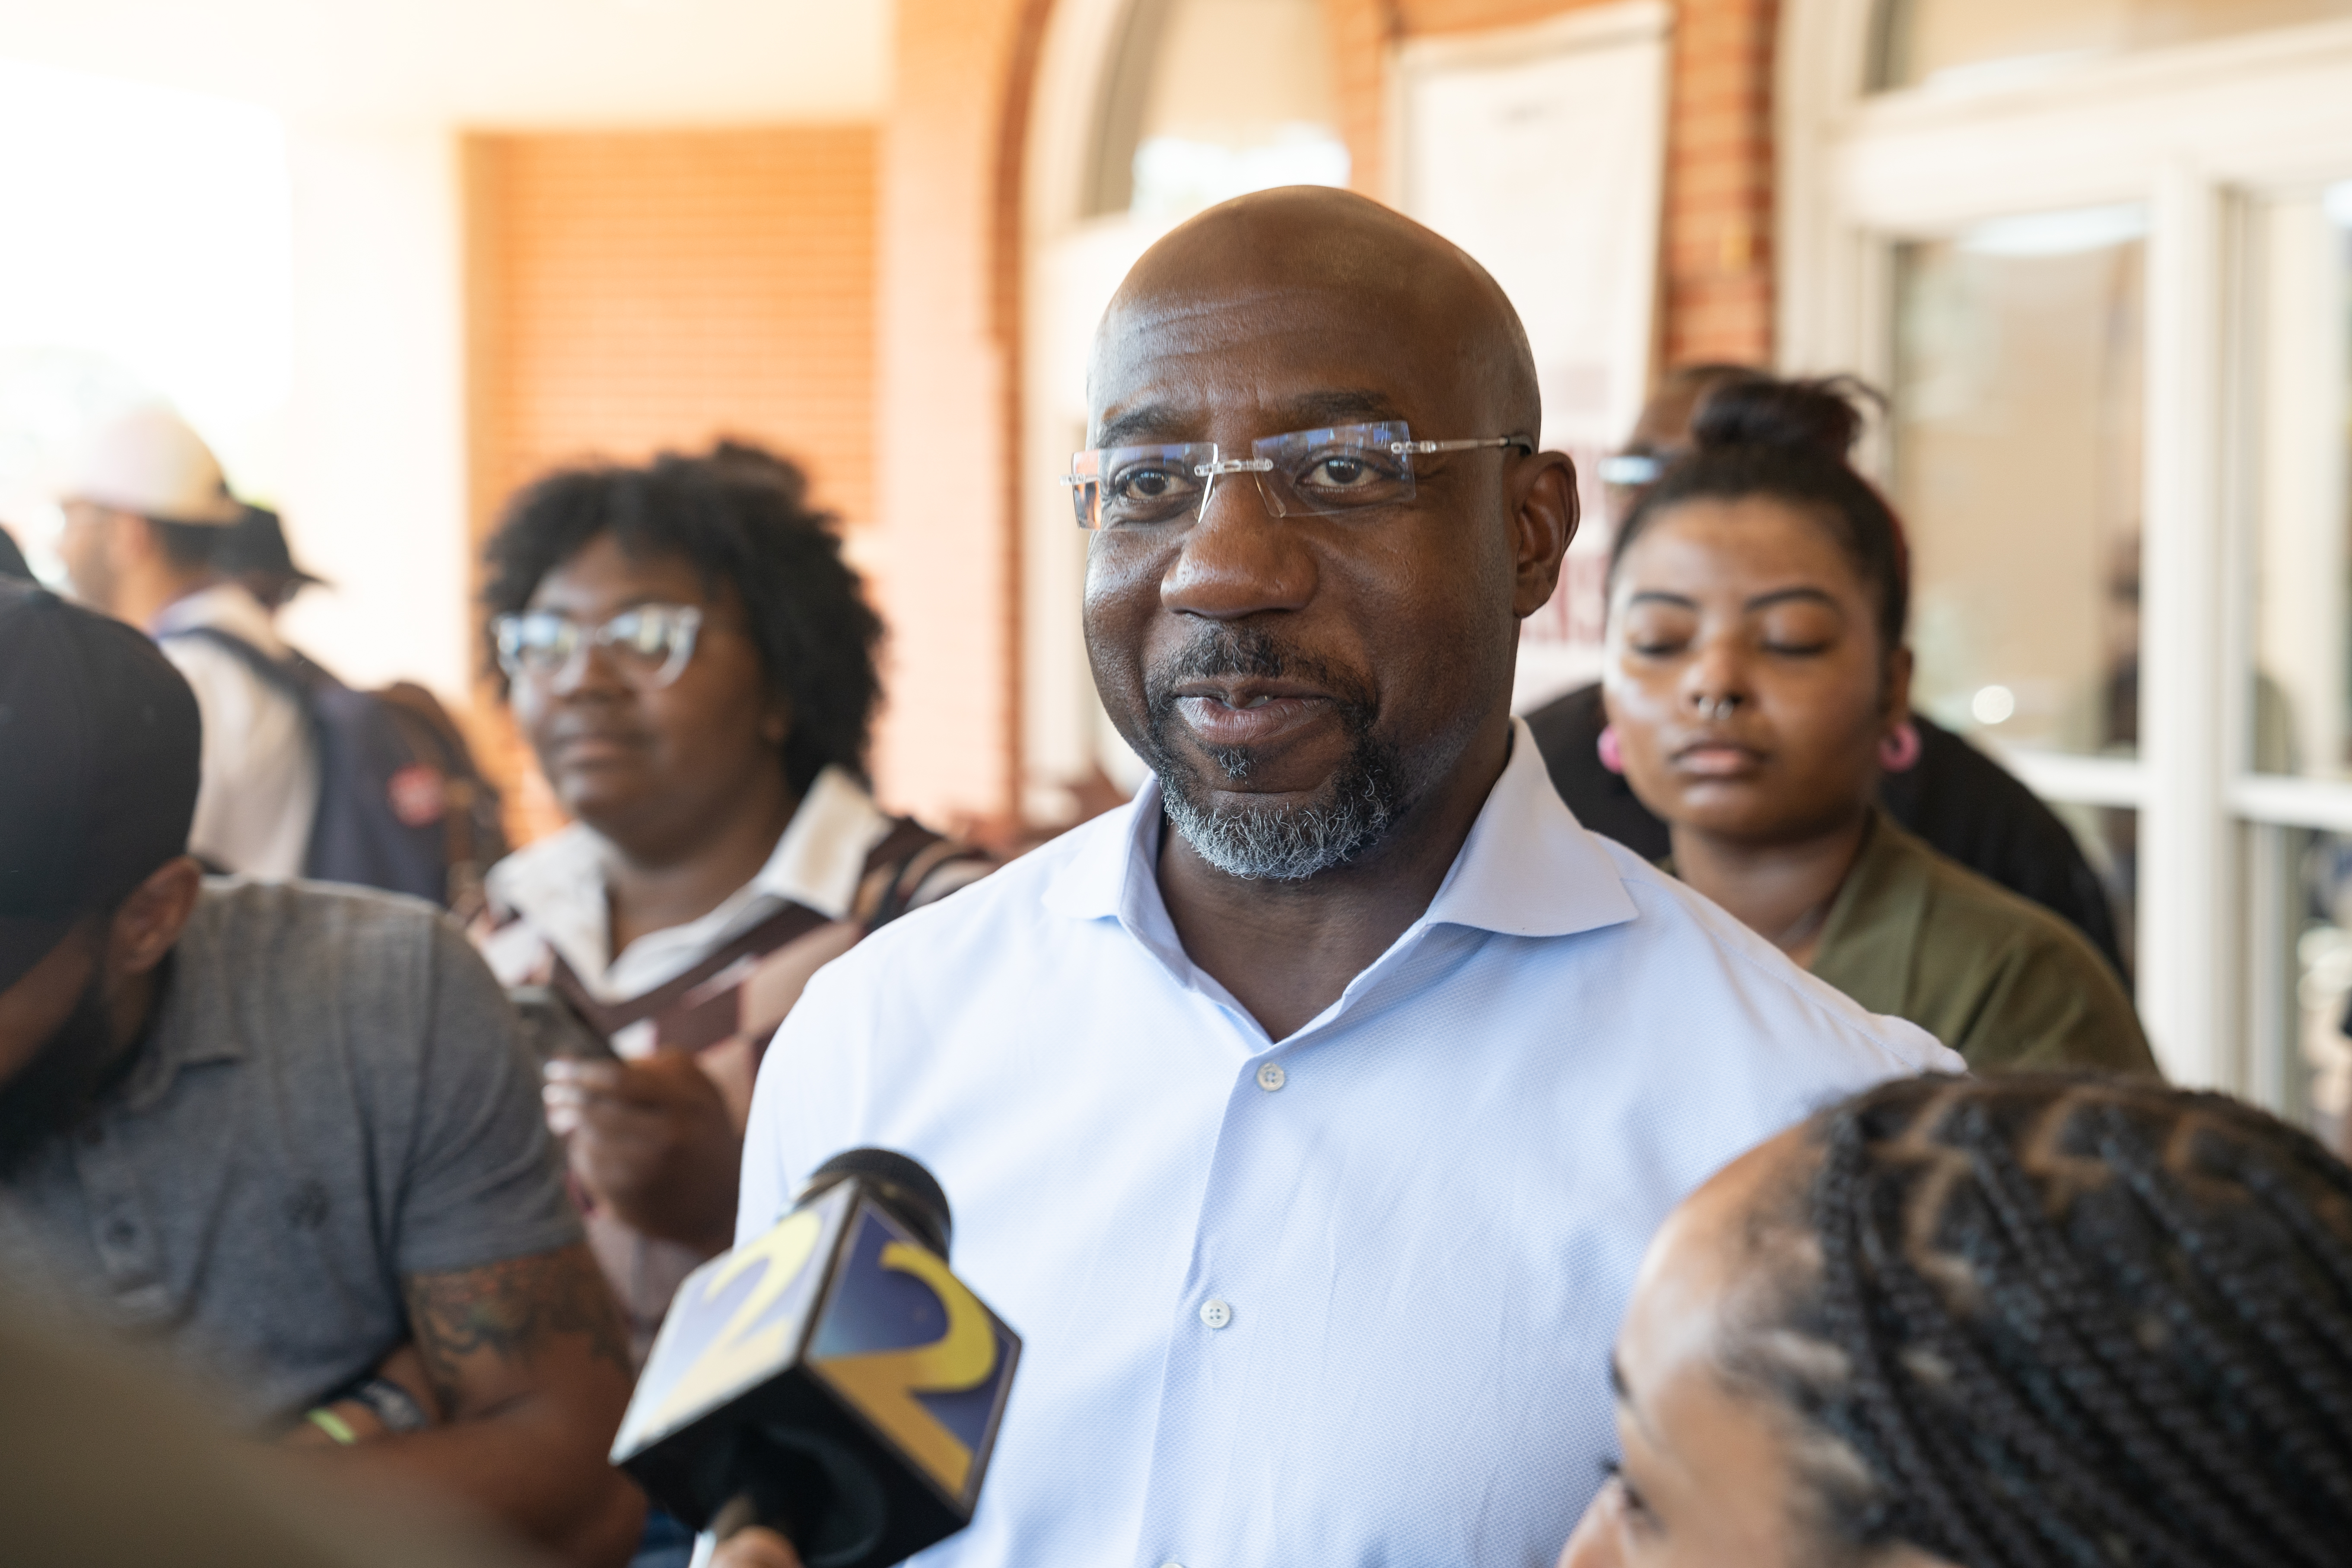 Sen. Raphael Warnock speaks at a campaign event at Atlanta University Center Consortium Campus on Election Day as voters all across Georgia take to the polls to cast their ballot on November 8, 2022 in Atlanta, Georgia.&nbsp;